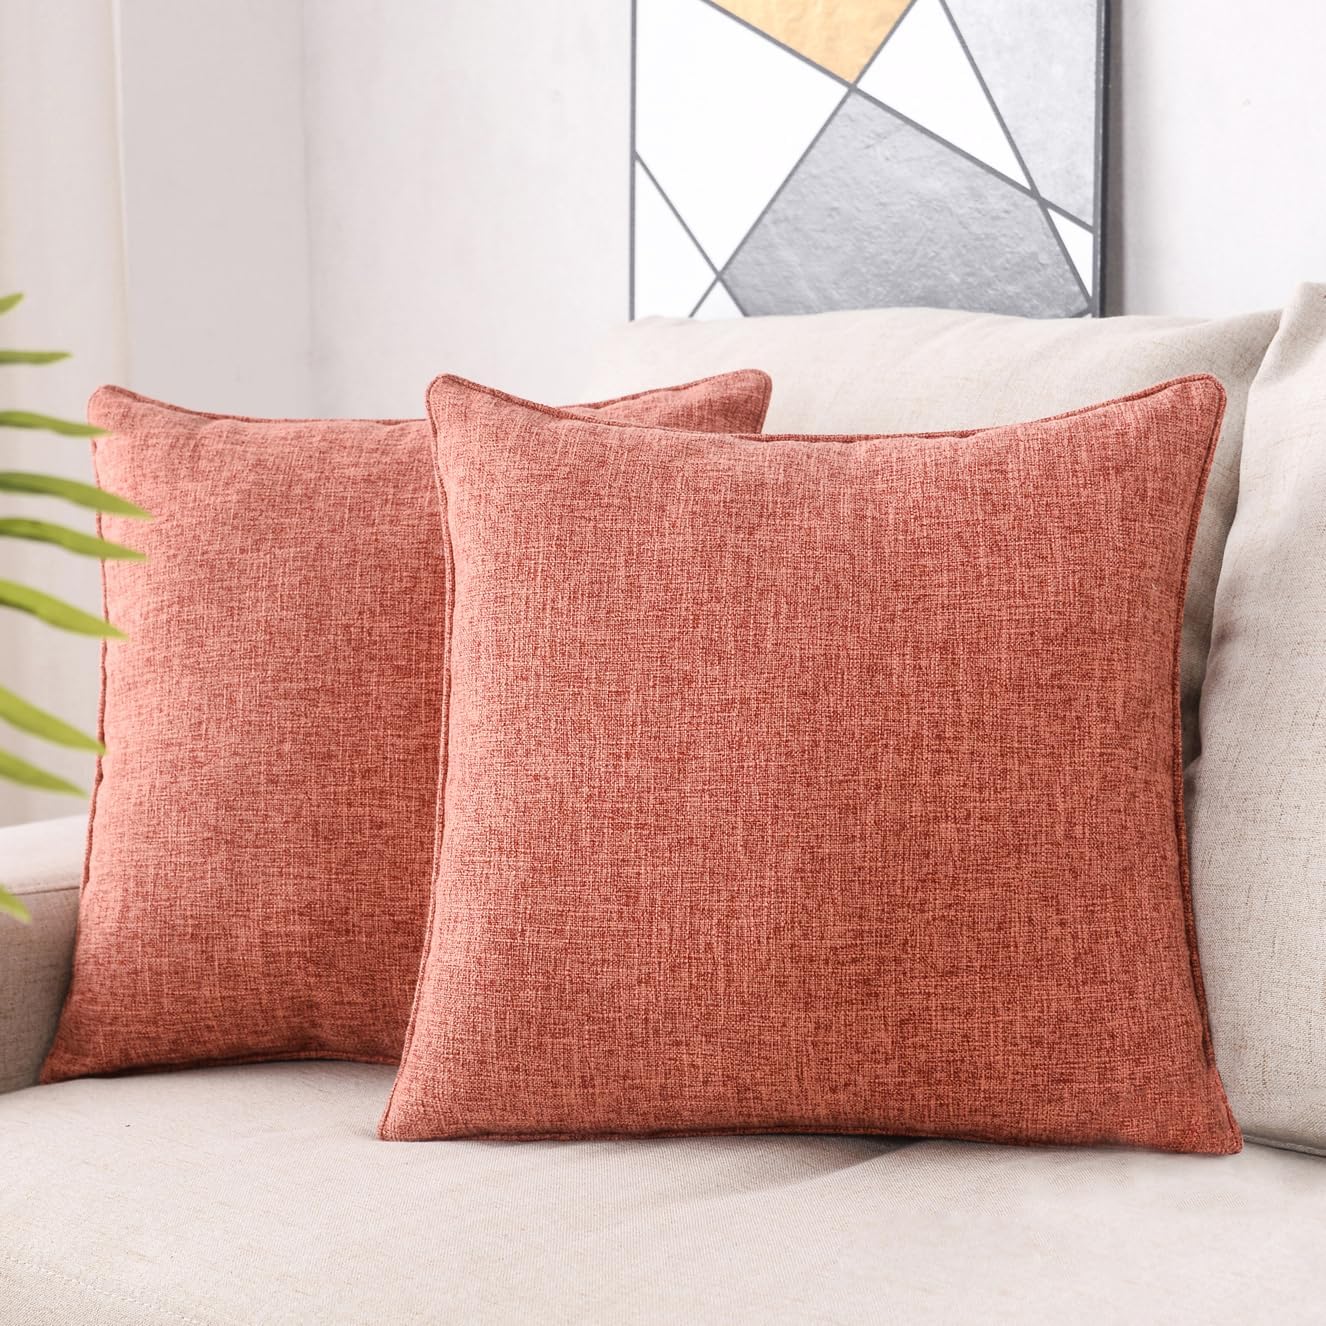 HPUK Linen Throw Pillow Covers Pack of 2, 18x18 Inch Accent Cushion Covers for Living Room, Bedroom, Decorative Solid Color Pillow Covers for Couch, Sofa, Chair, Coral